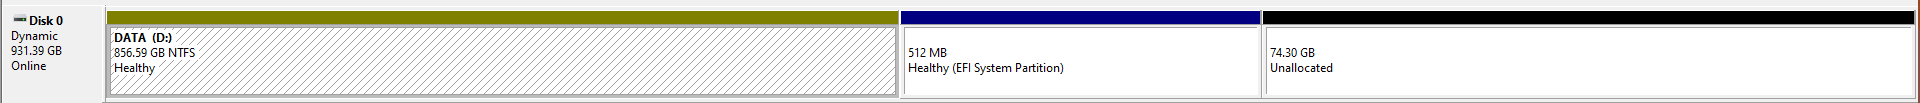 Cannot Extend Disk in to Unallocated space f351204c-cfb0-439f-bd49-a2fbb9f1fa0f?upload=true.png